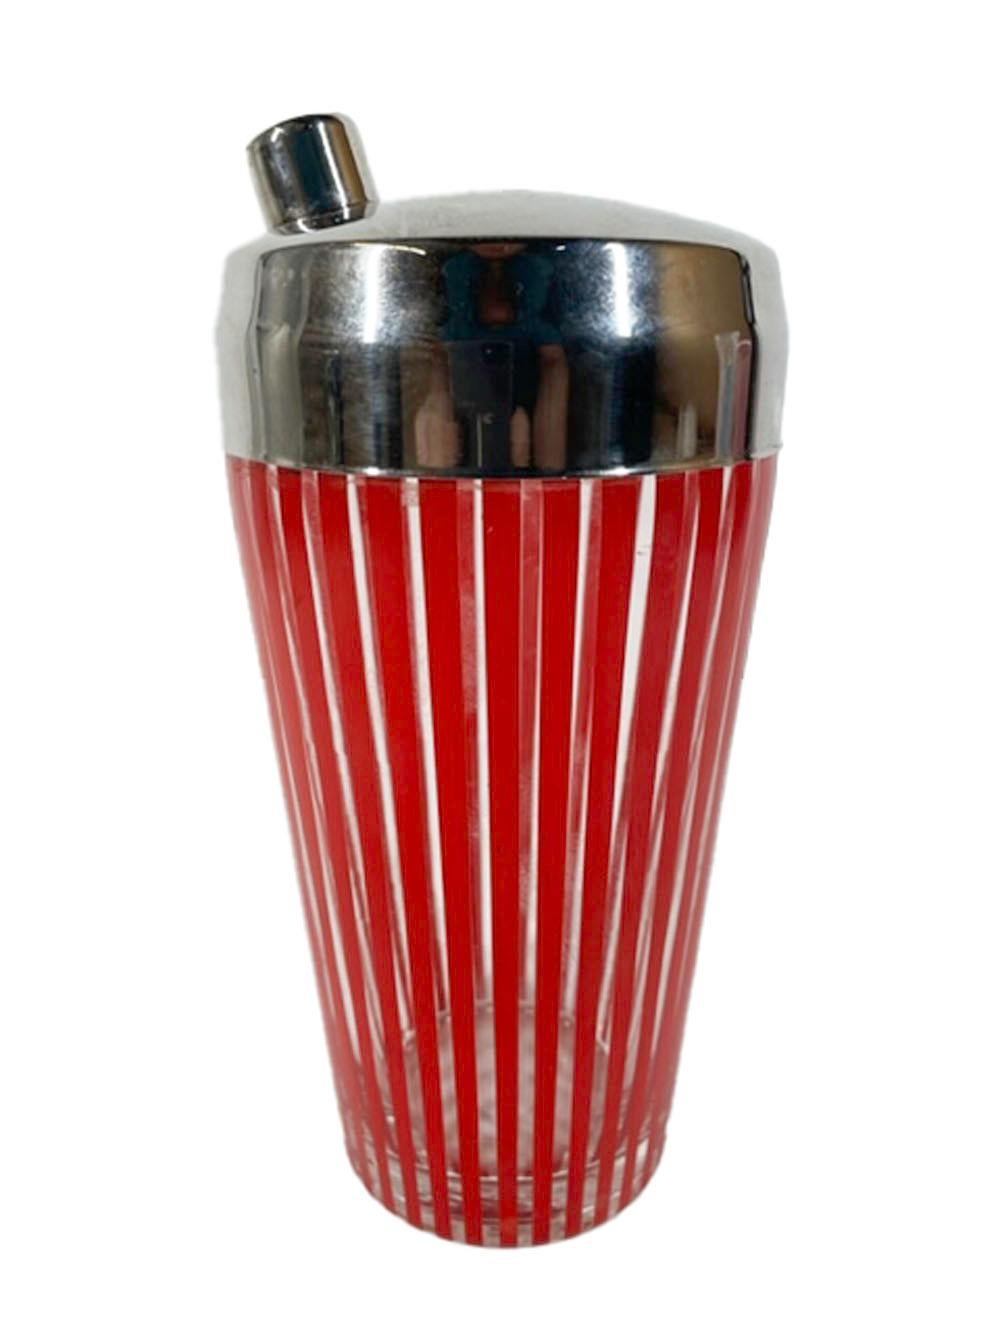 American Art Deco Cocktail Shaker with Chrome Lid, Decorated with Vertical Red Stripes